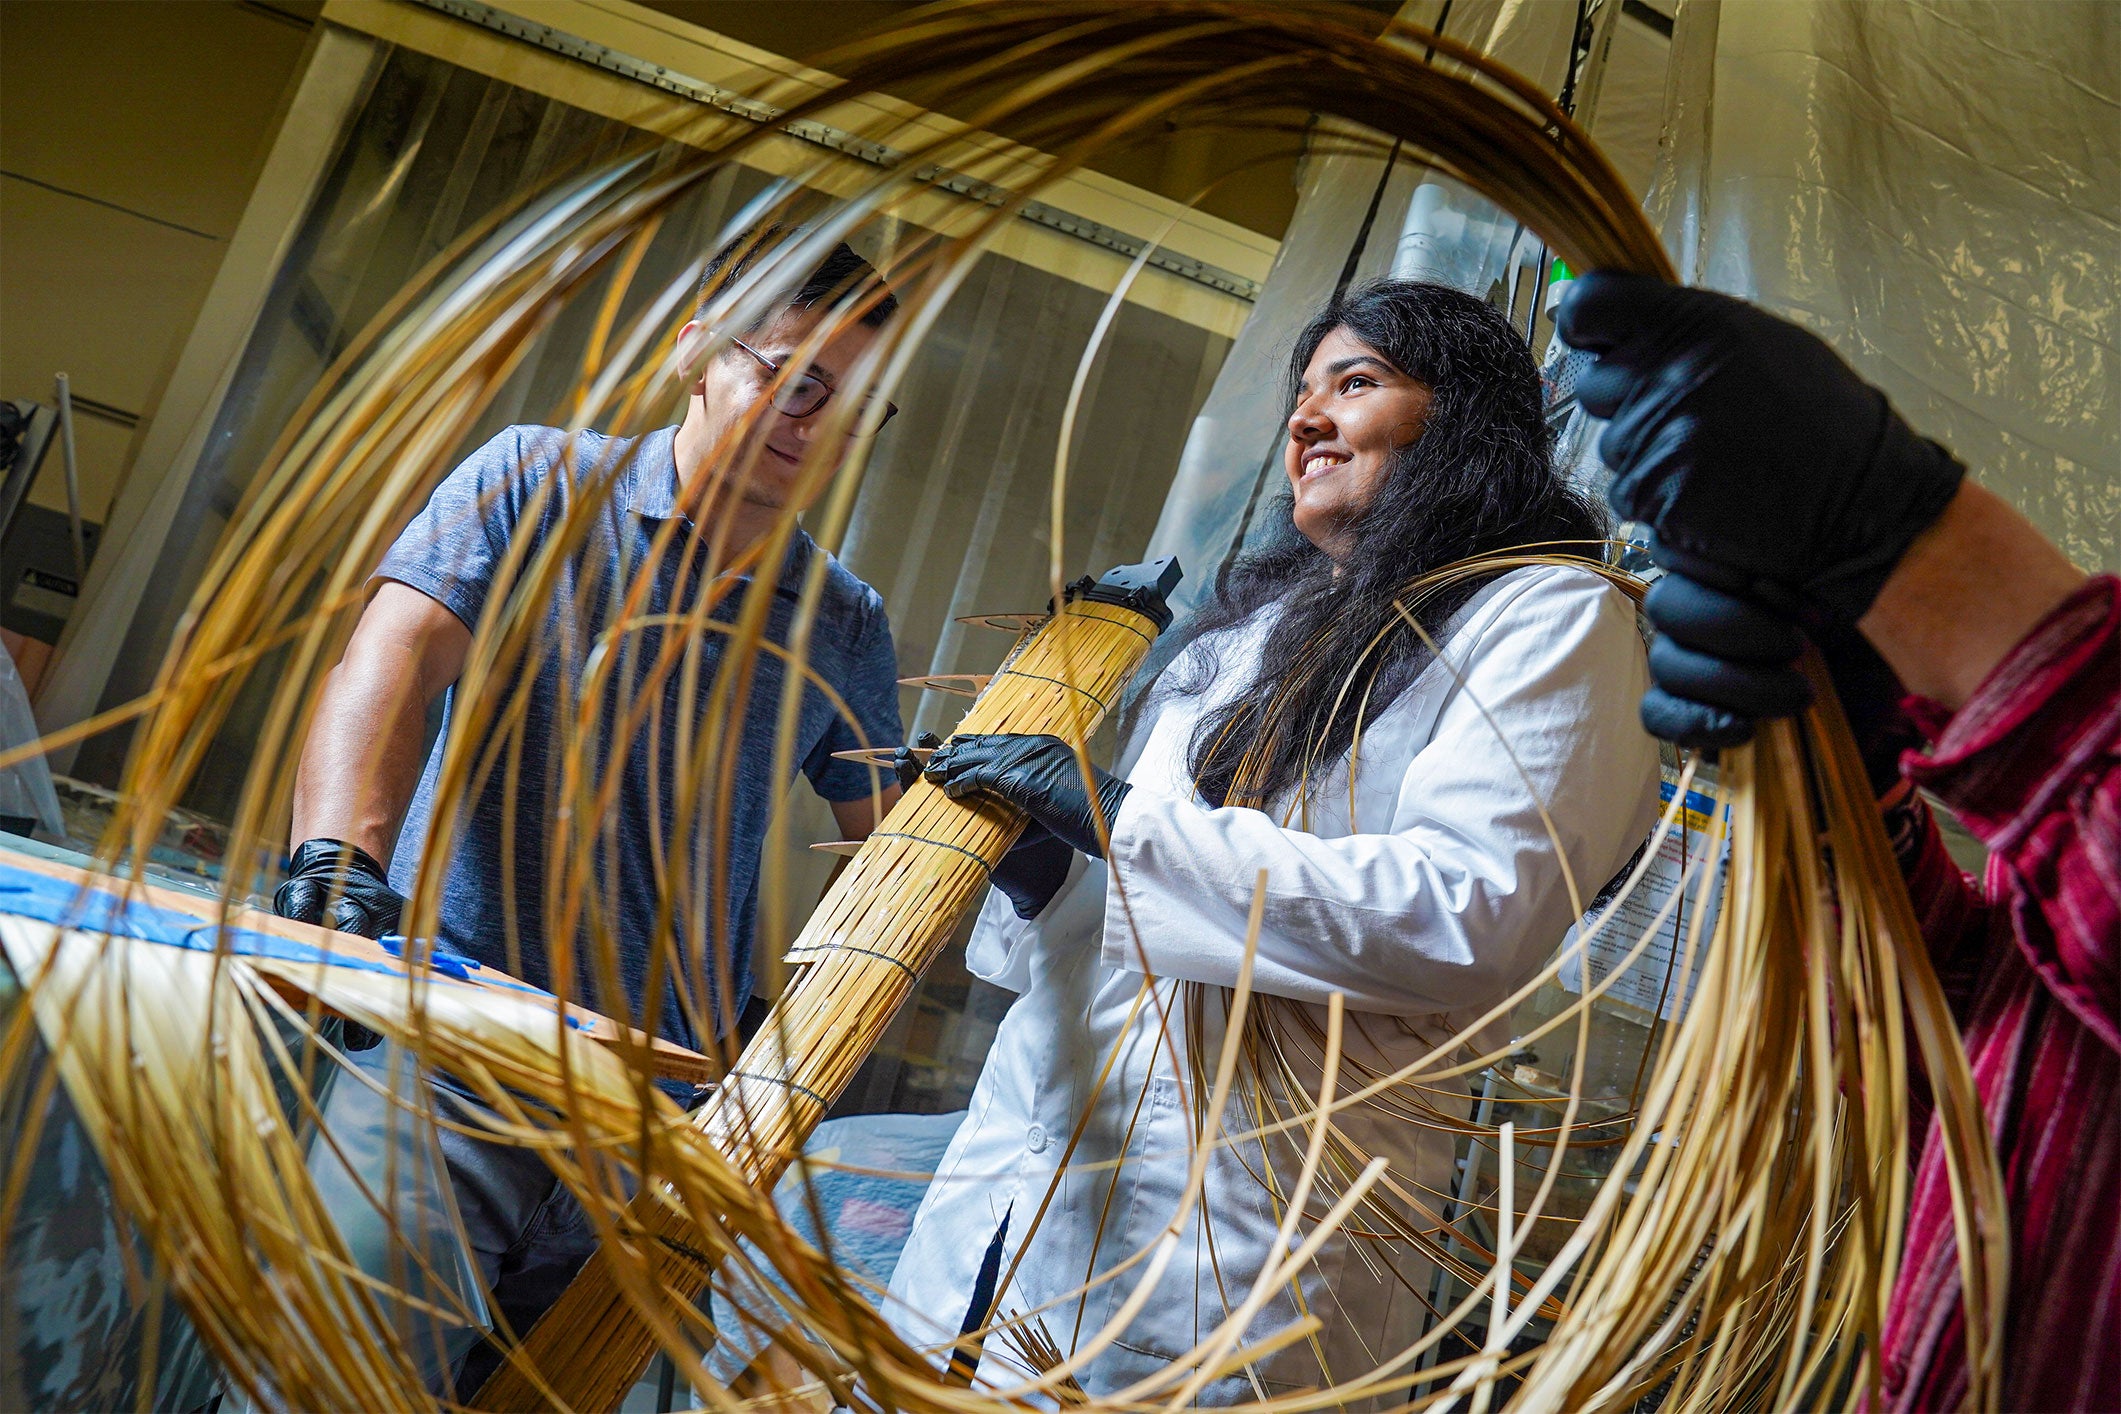 UC Davis students learn and preserve the age-old art of basket weaving, connecting with ancestral skills and traditions. (Karin Higgins/UC Davis)